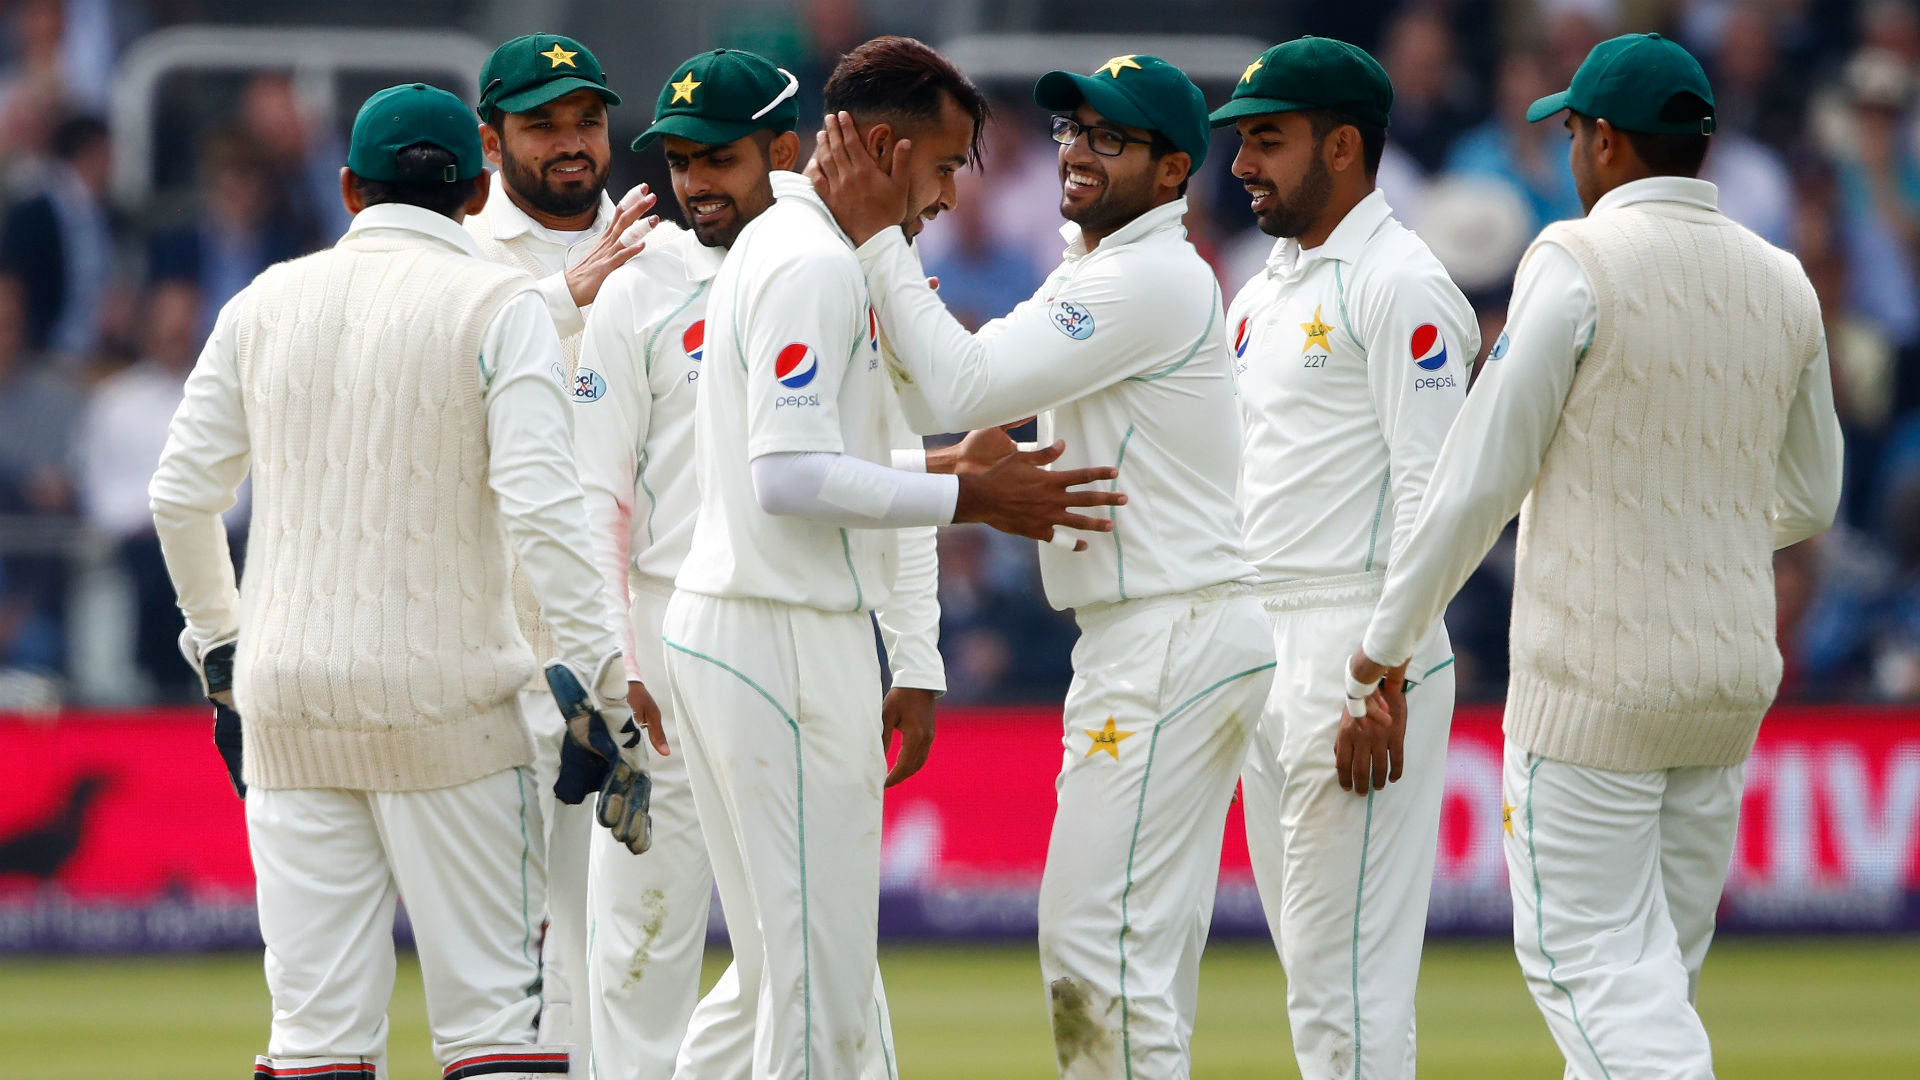 After two Pakistan players were spotted with smart watches at Lord's, the ICC has confirmed wearing the devices is not permitted.